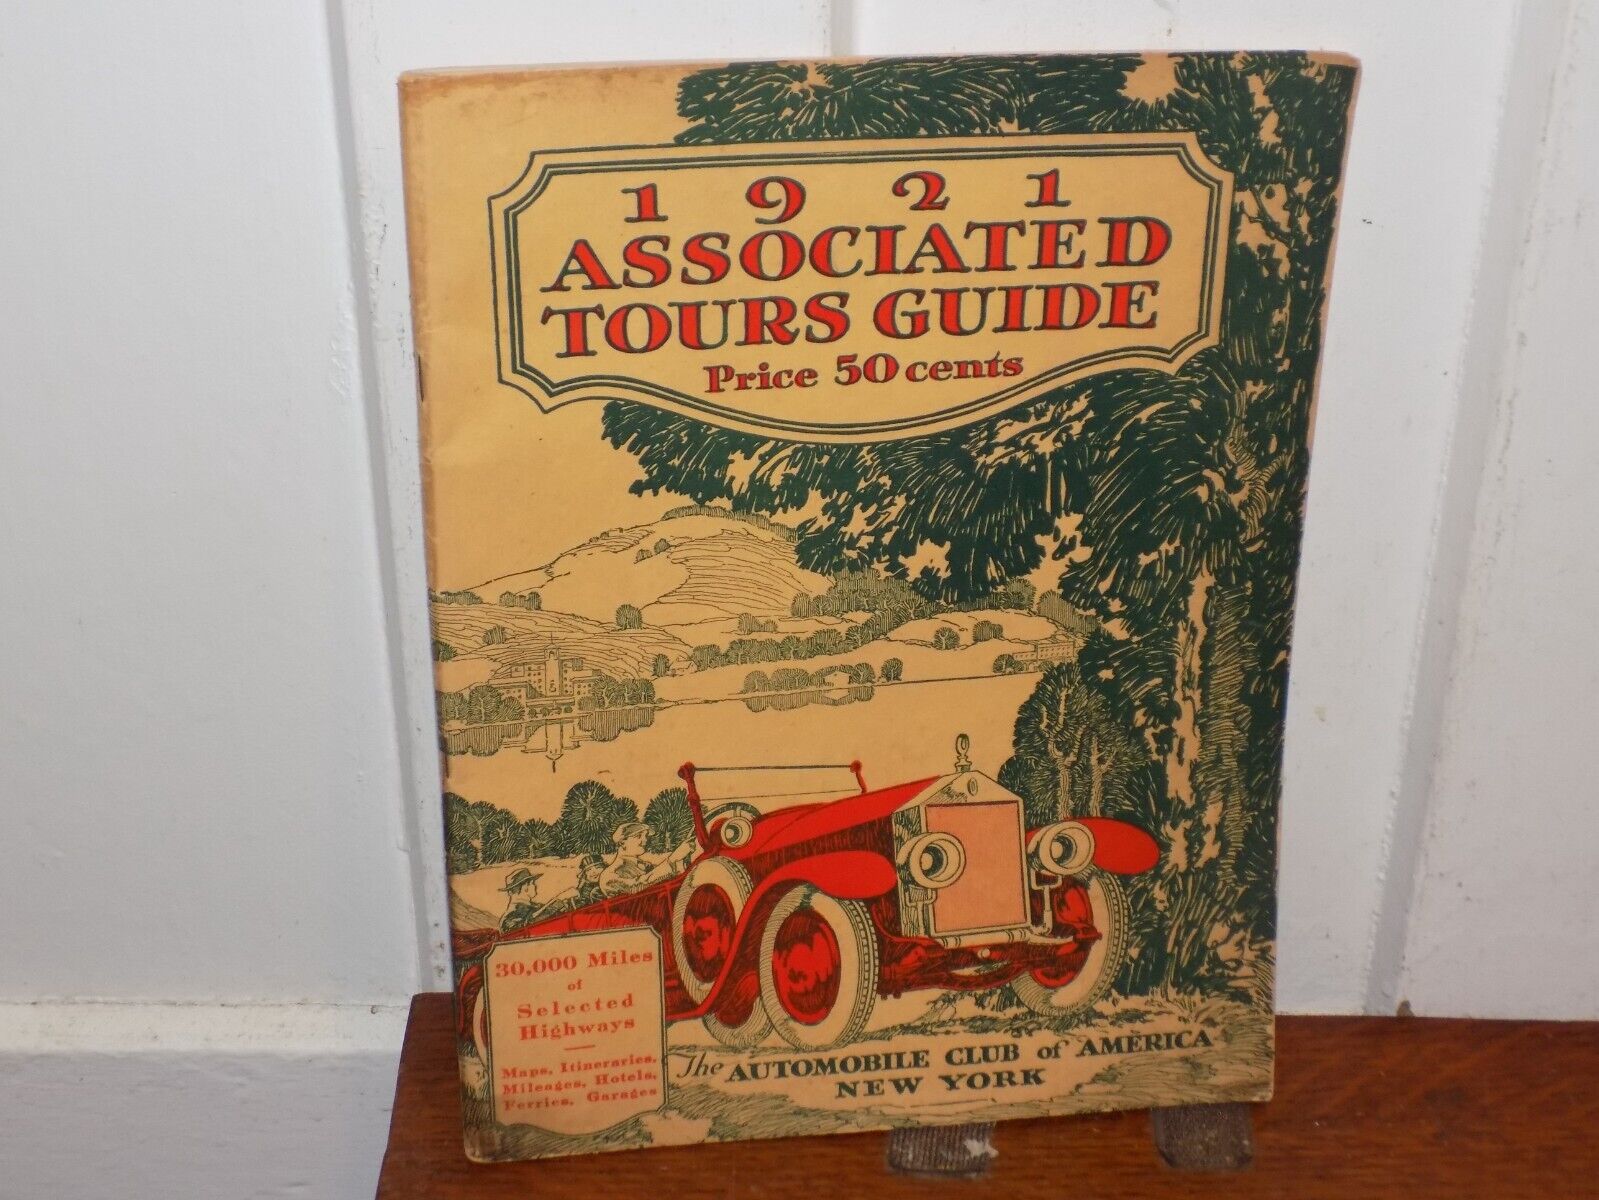 Vintage 1921 Associated Tours Guide Automobile Club of America. Booklet